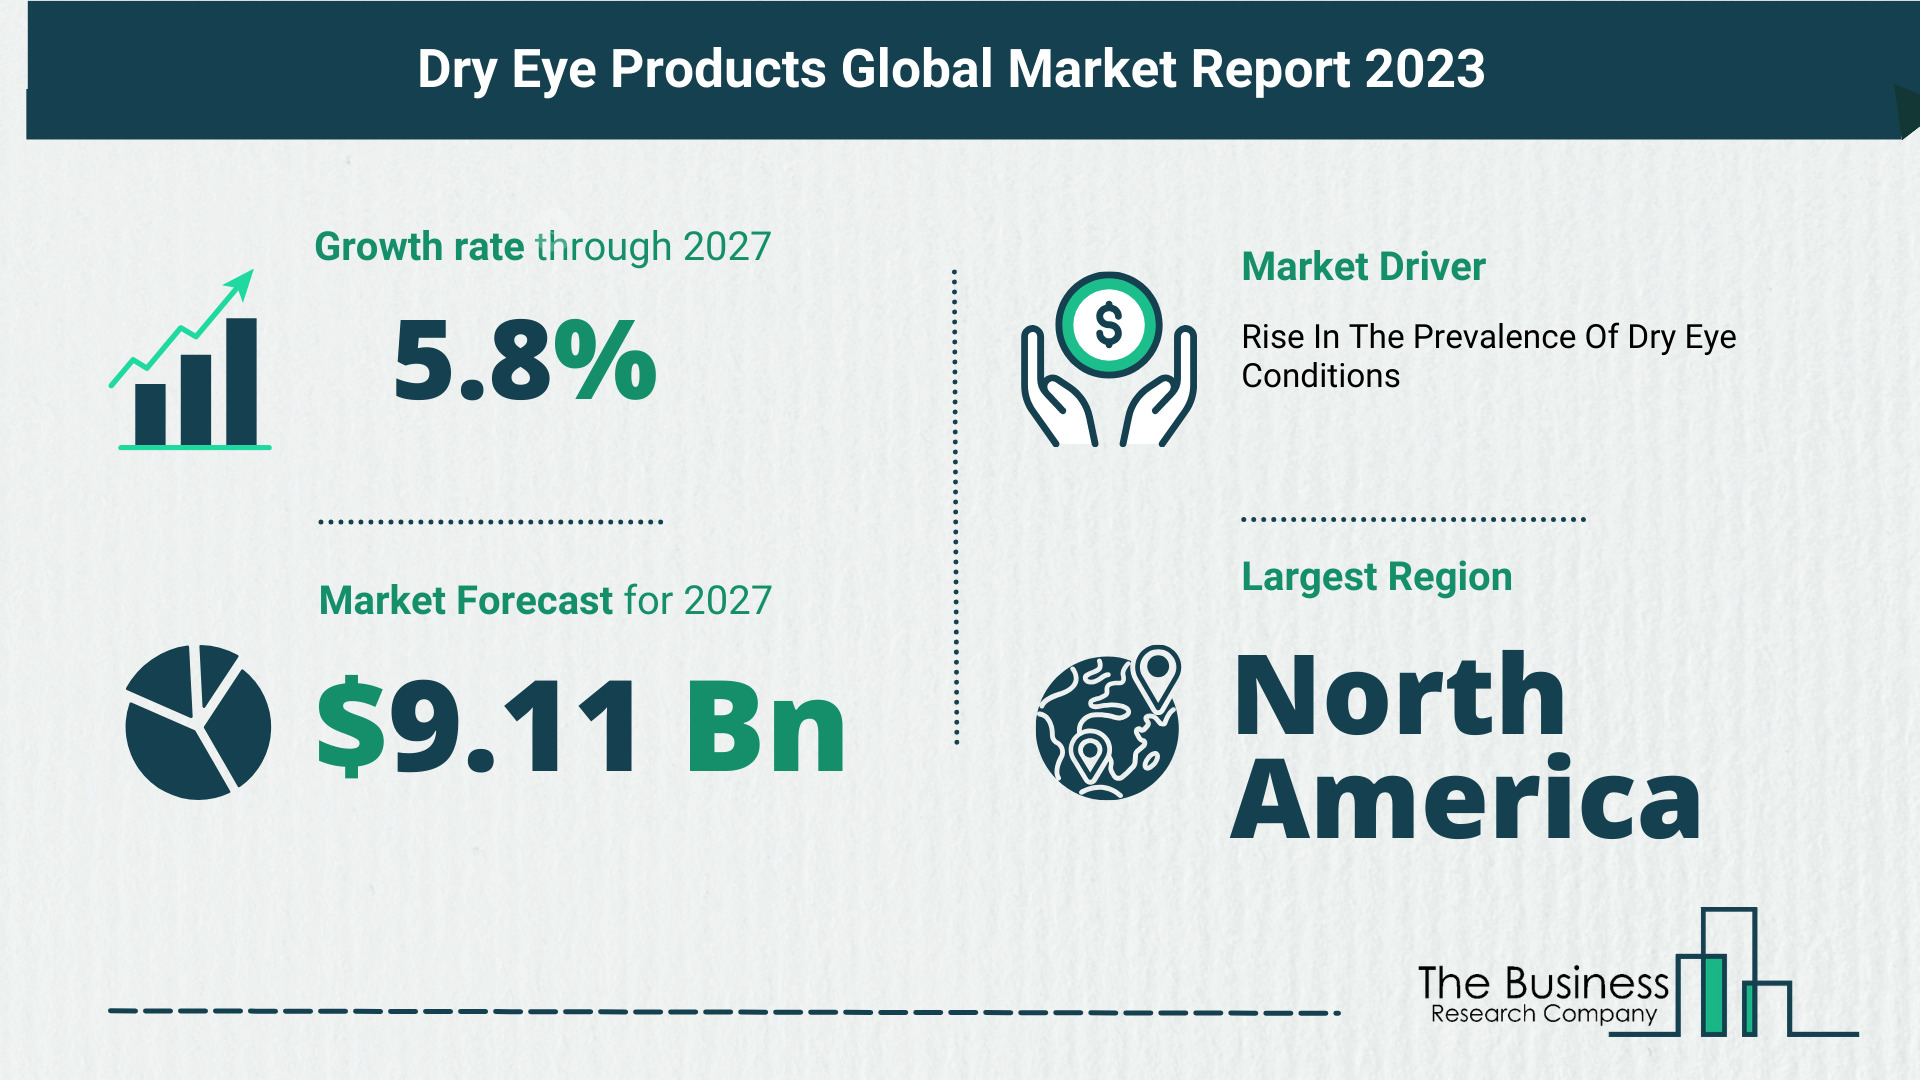 Key Trends And Drivers In The Dry Eye Products Market 2023